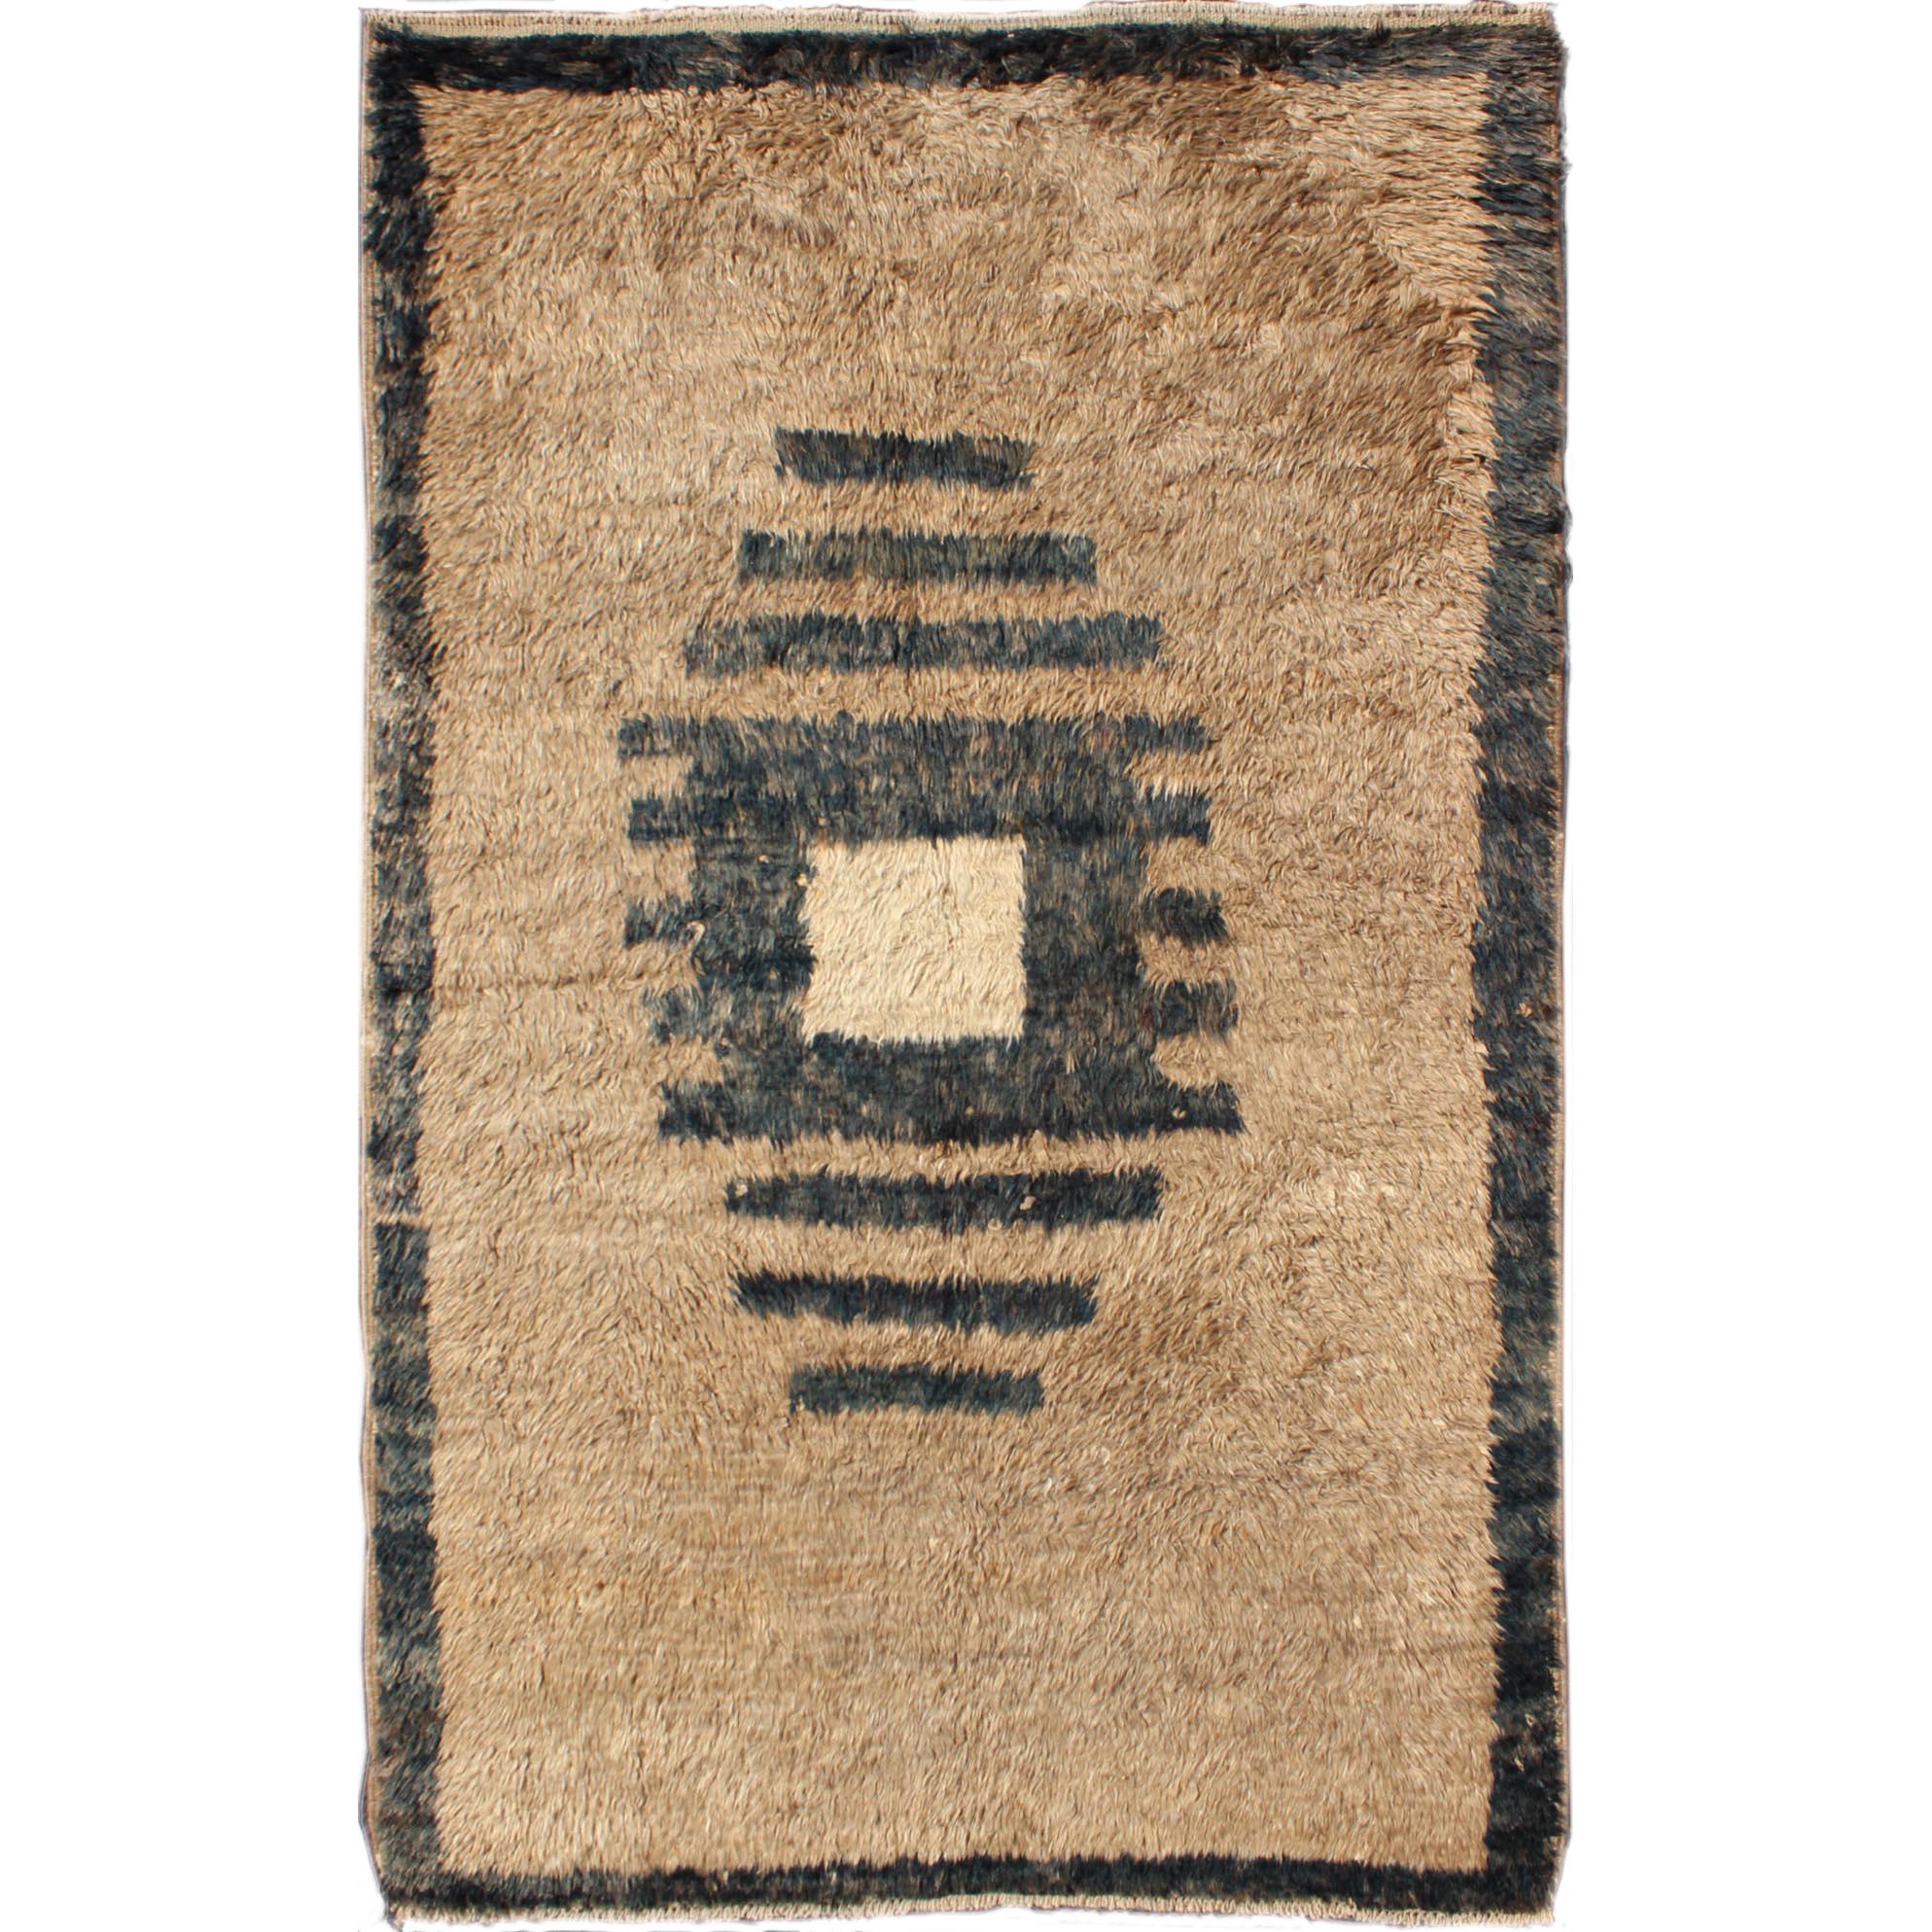 Vintage Turkish Tulu Rug with Modern Geometric Medallion in Sand and Charcoal